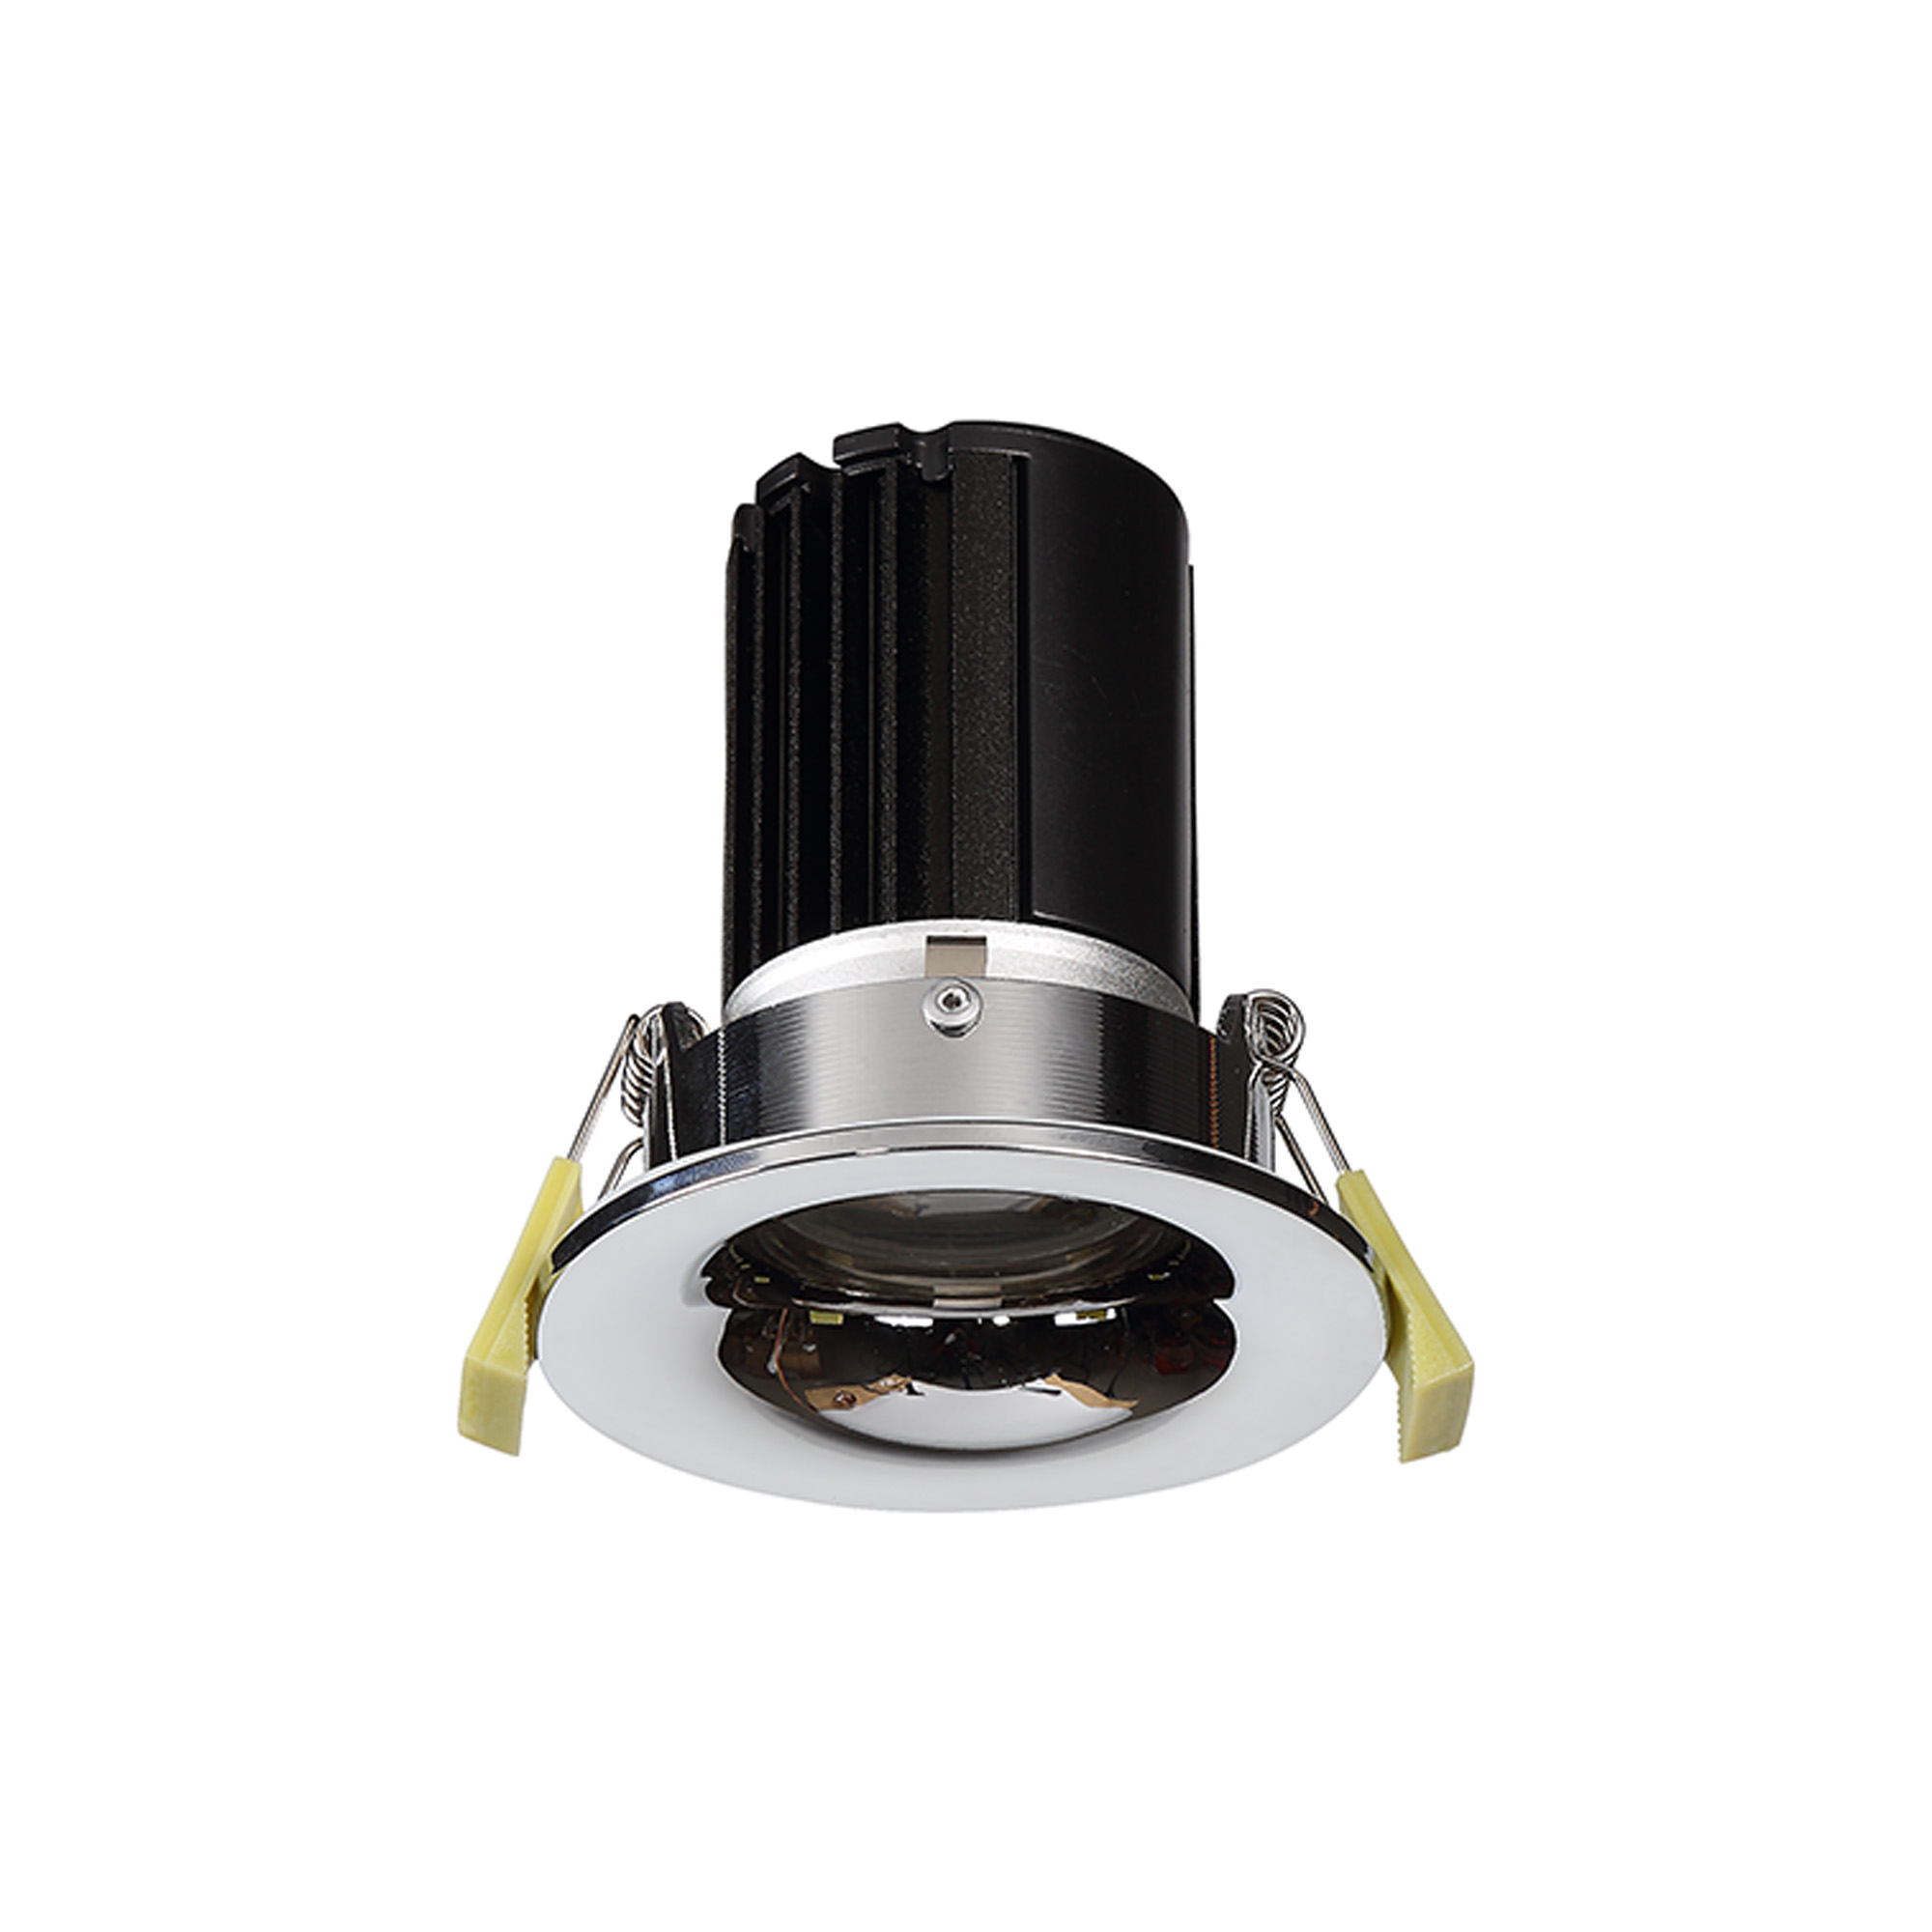 DM202494  Bruve 12 Tridonic powered 12W 3000K 1200lm 36° LED Engine;300mA ; CRI>90 LED Engine Polished Chrome Fixed Round Recessed Downlight; Inner Glass cover; IP65